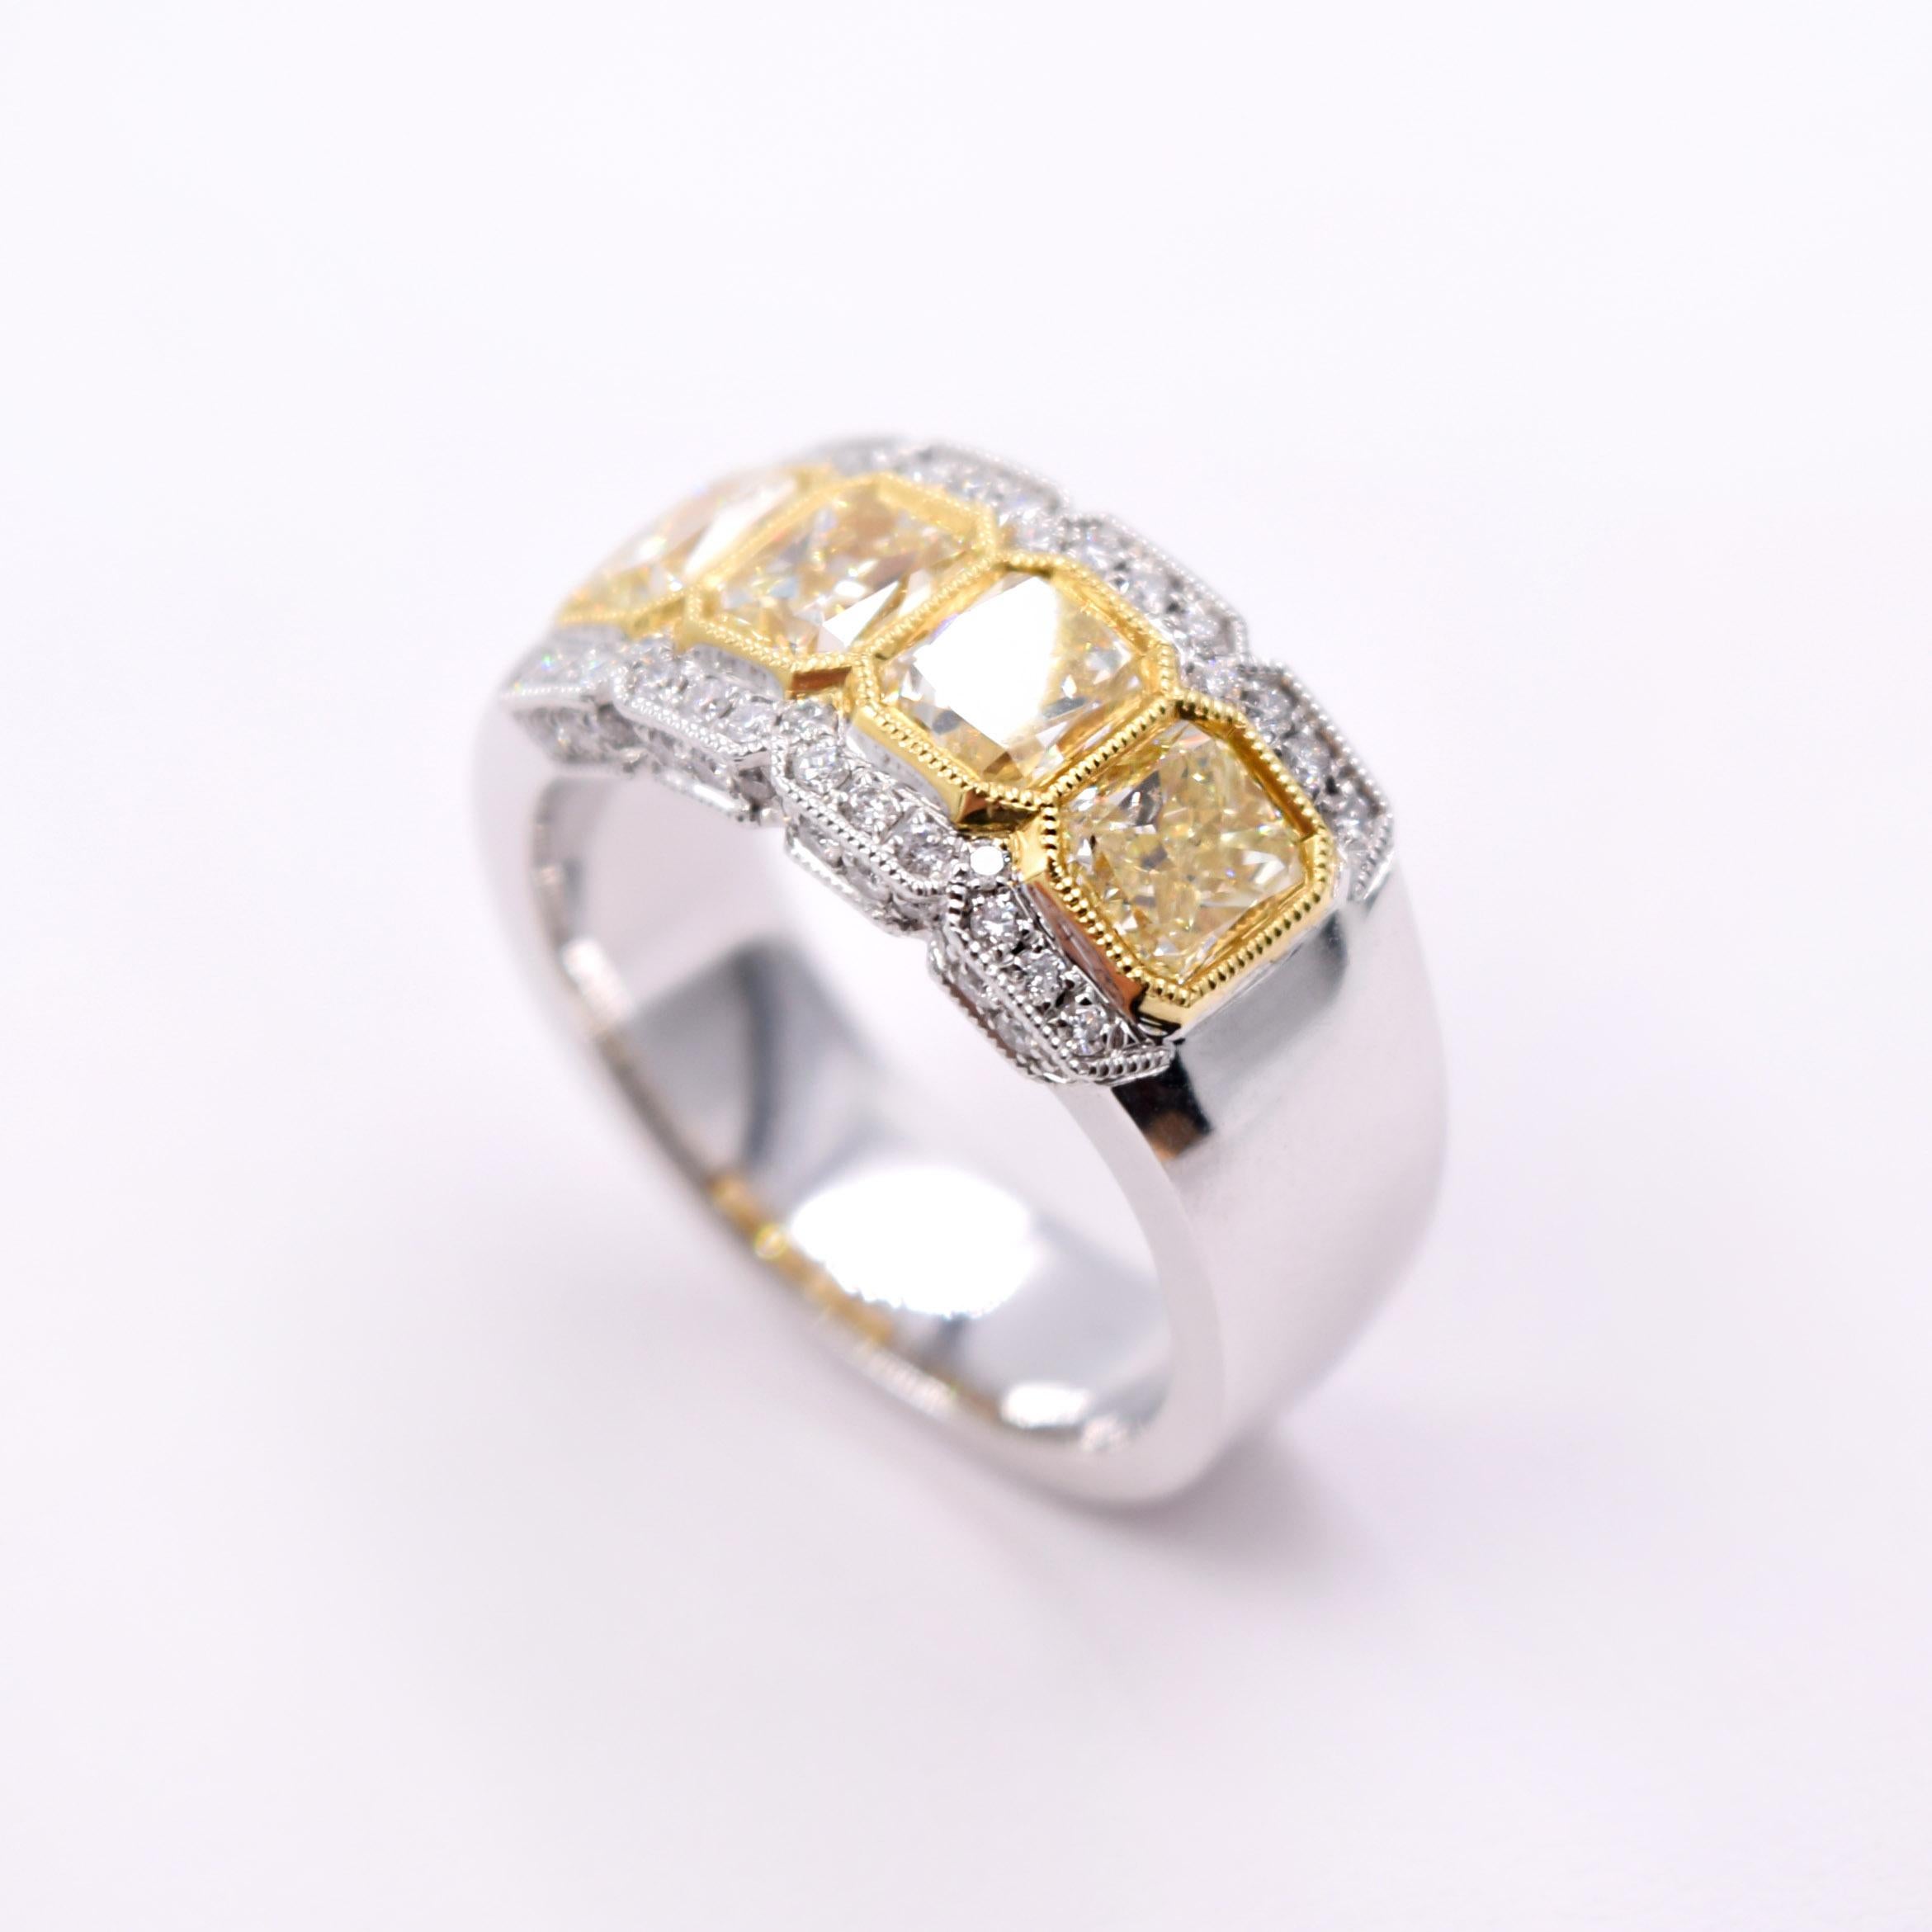 2.38 Carat Fancy Yellow Radiant Cut Four-Stone Diamond Ring in 18 Karat Gold In New Condition For Sale In Mill Valley, CA